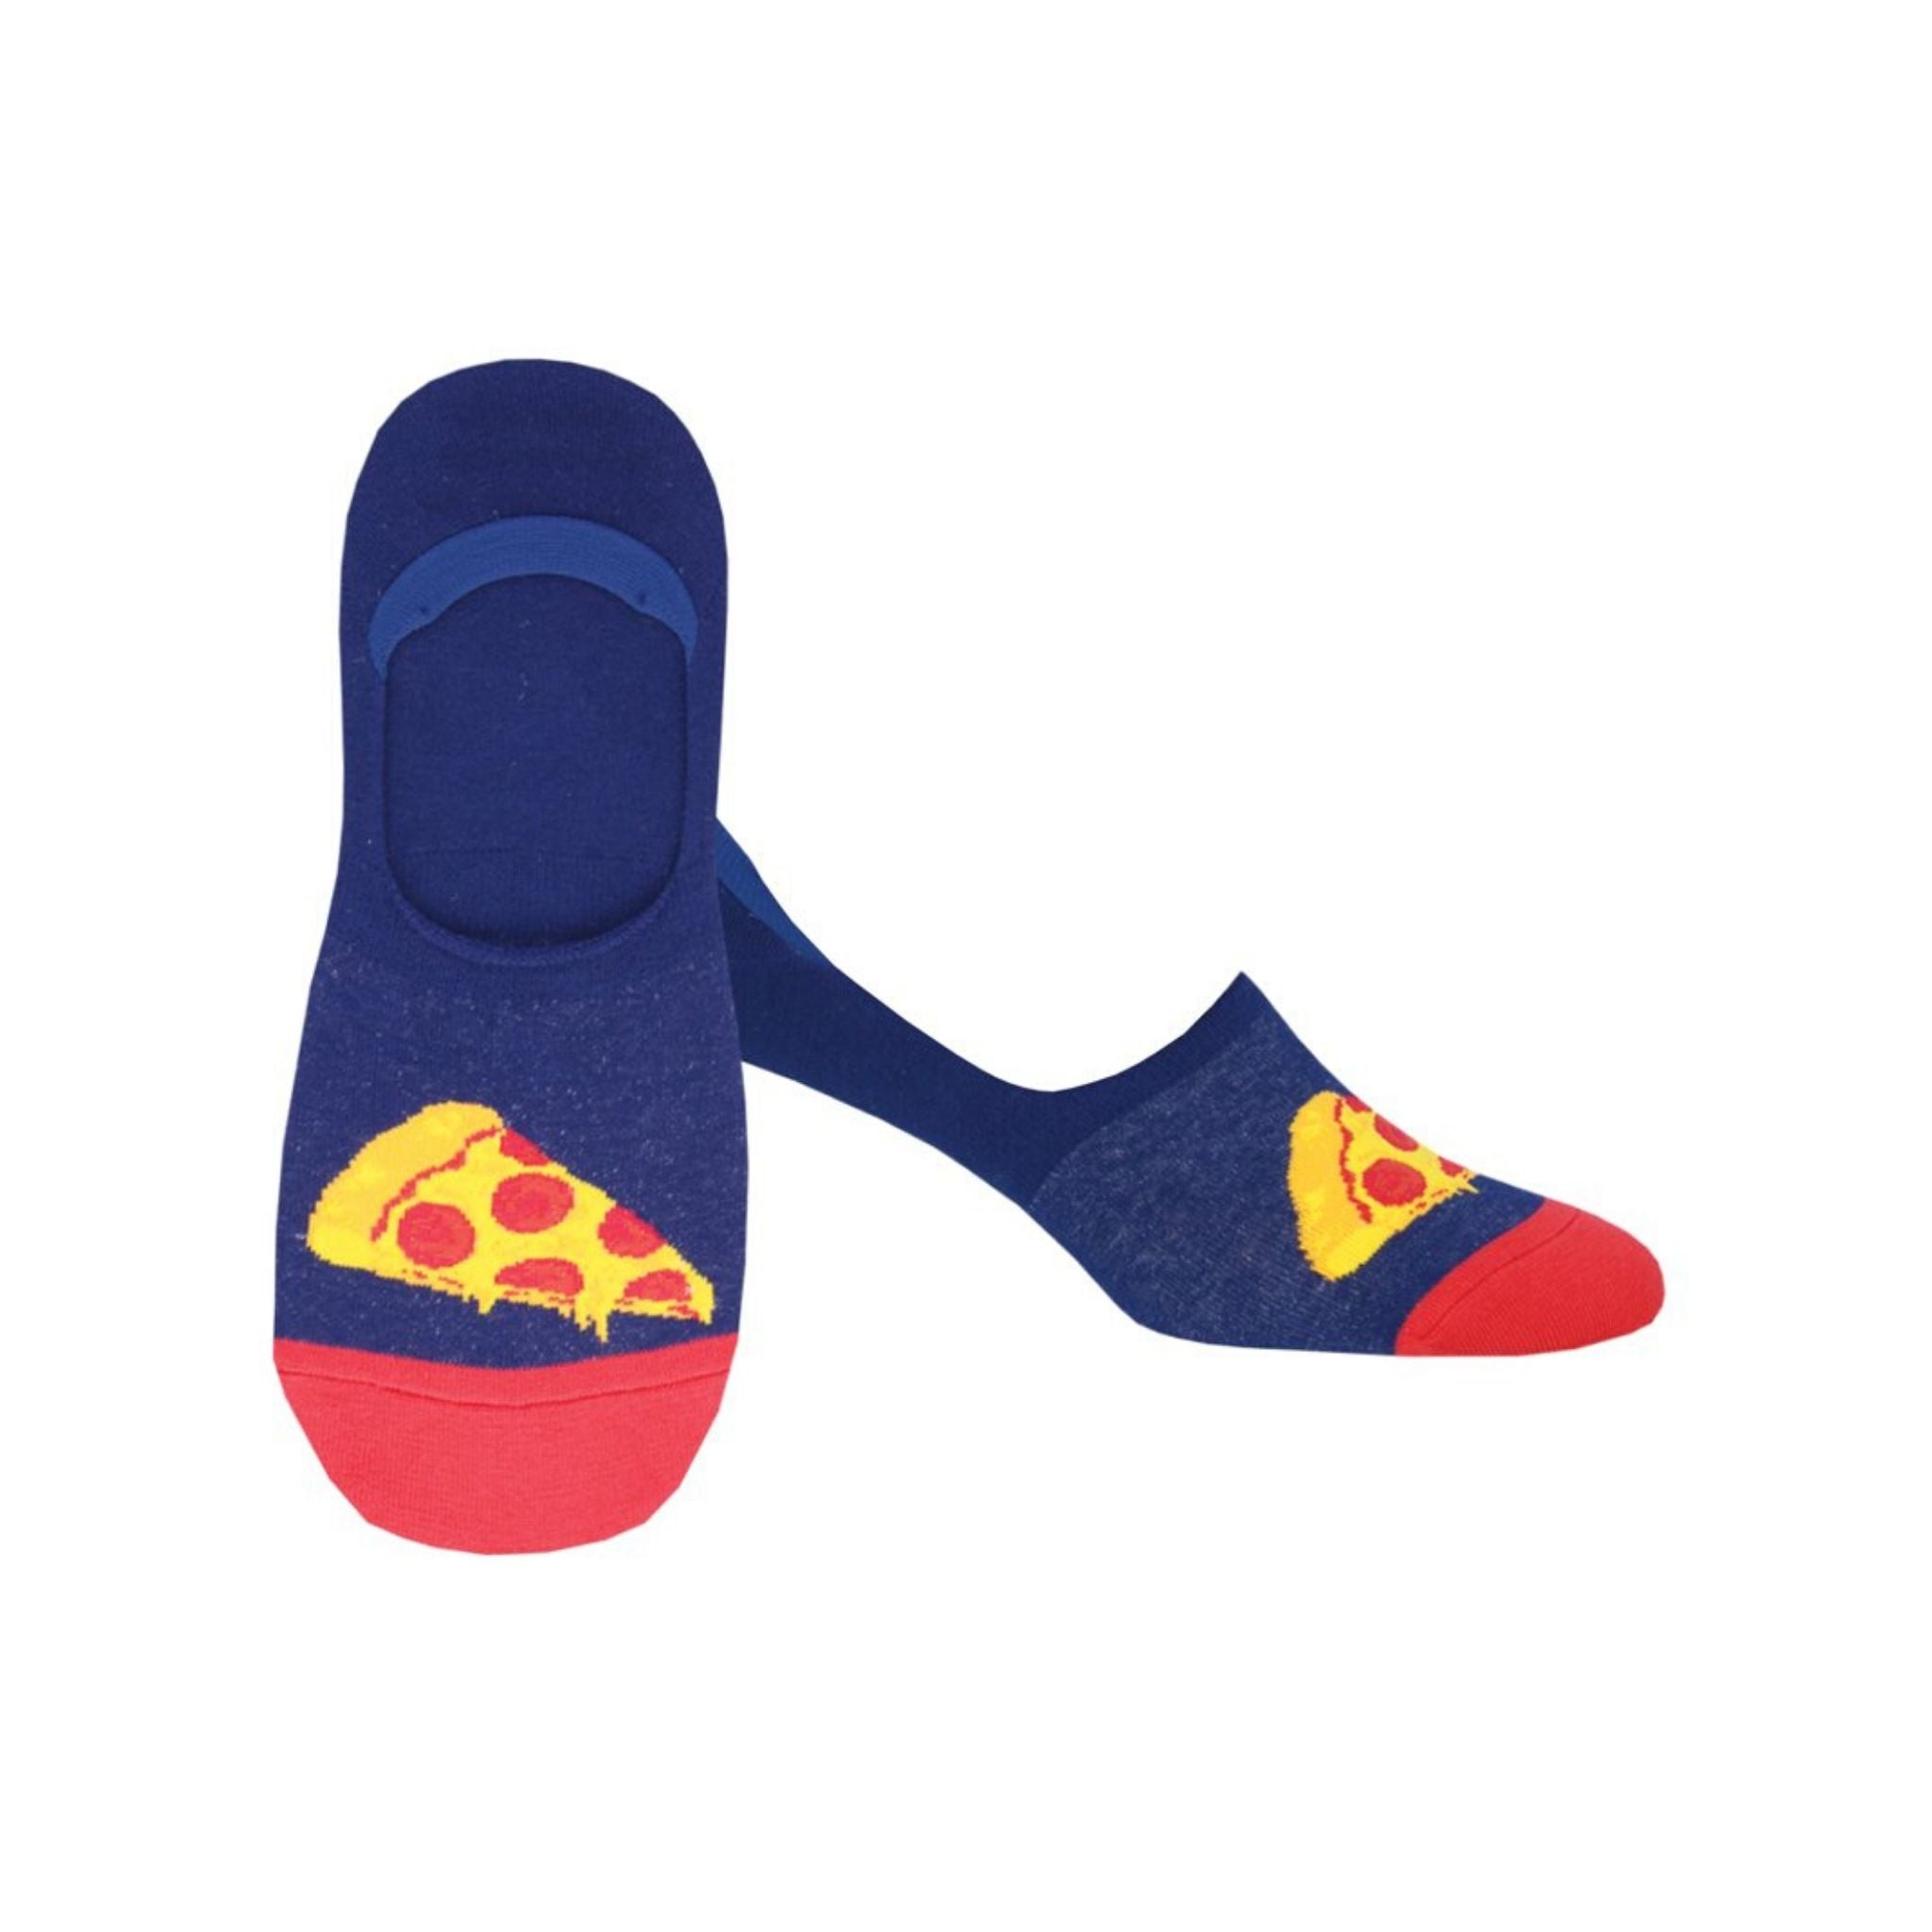 A pair of men's navy low cut, sock liners with a red toe and pizza print on top.